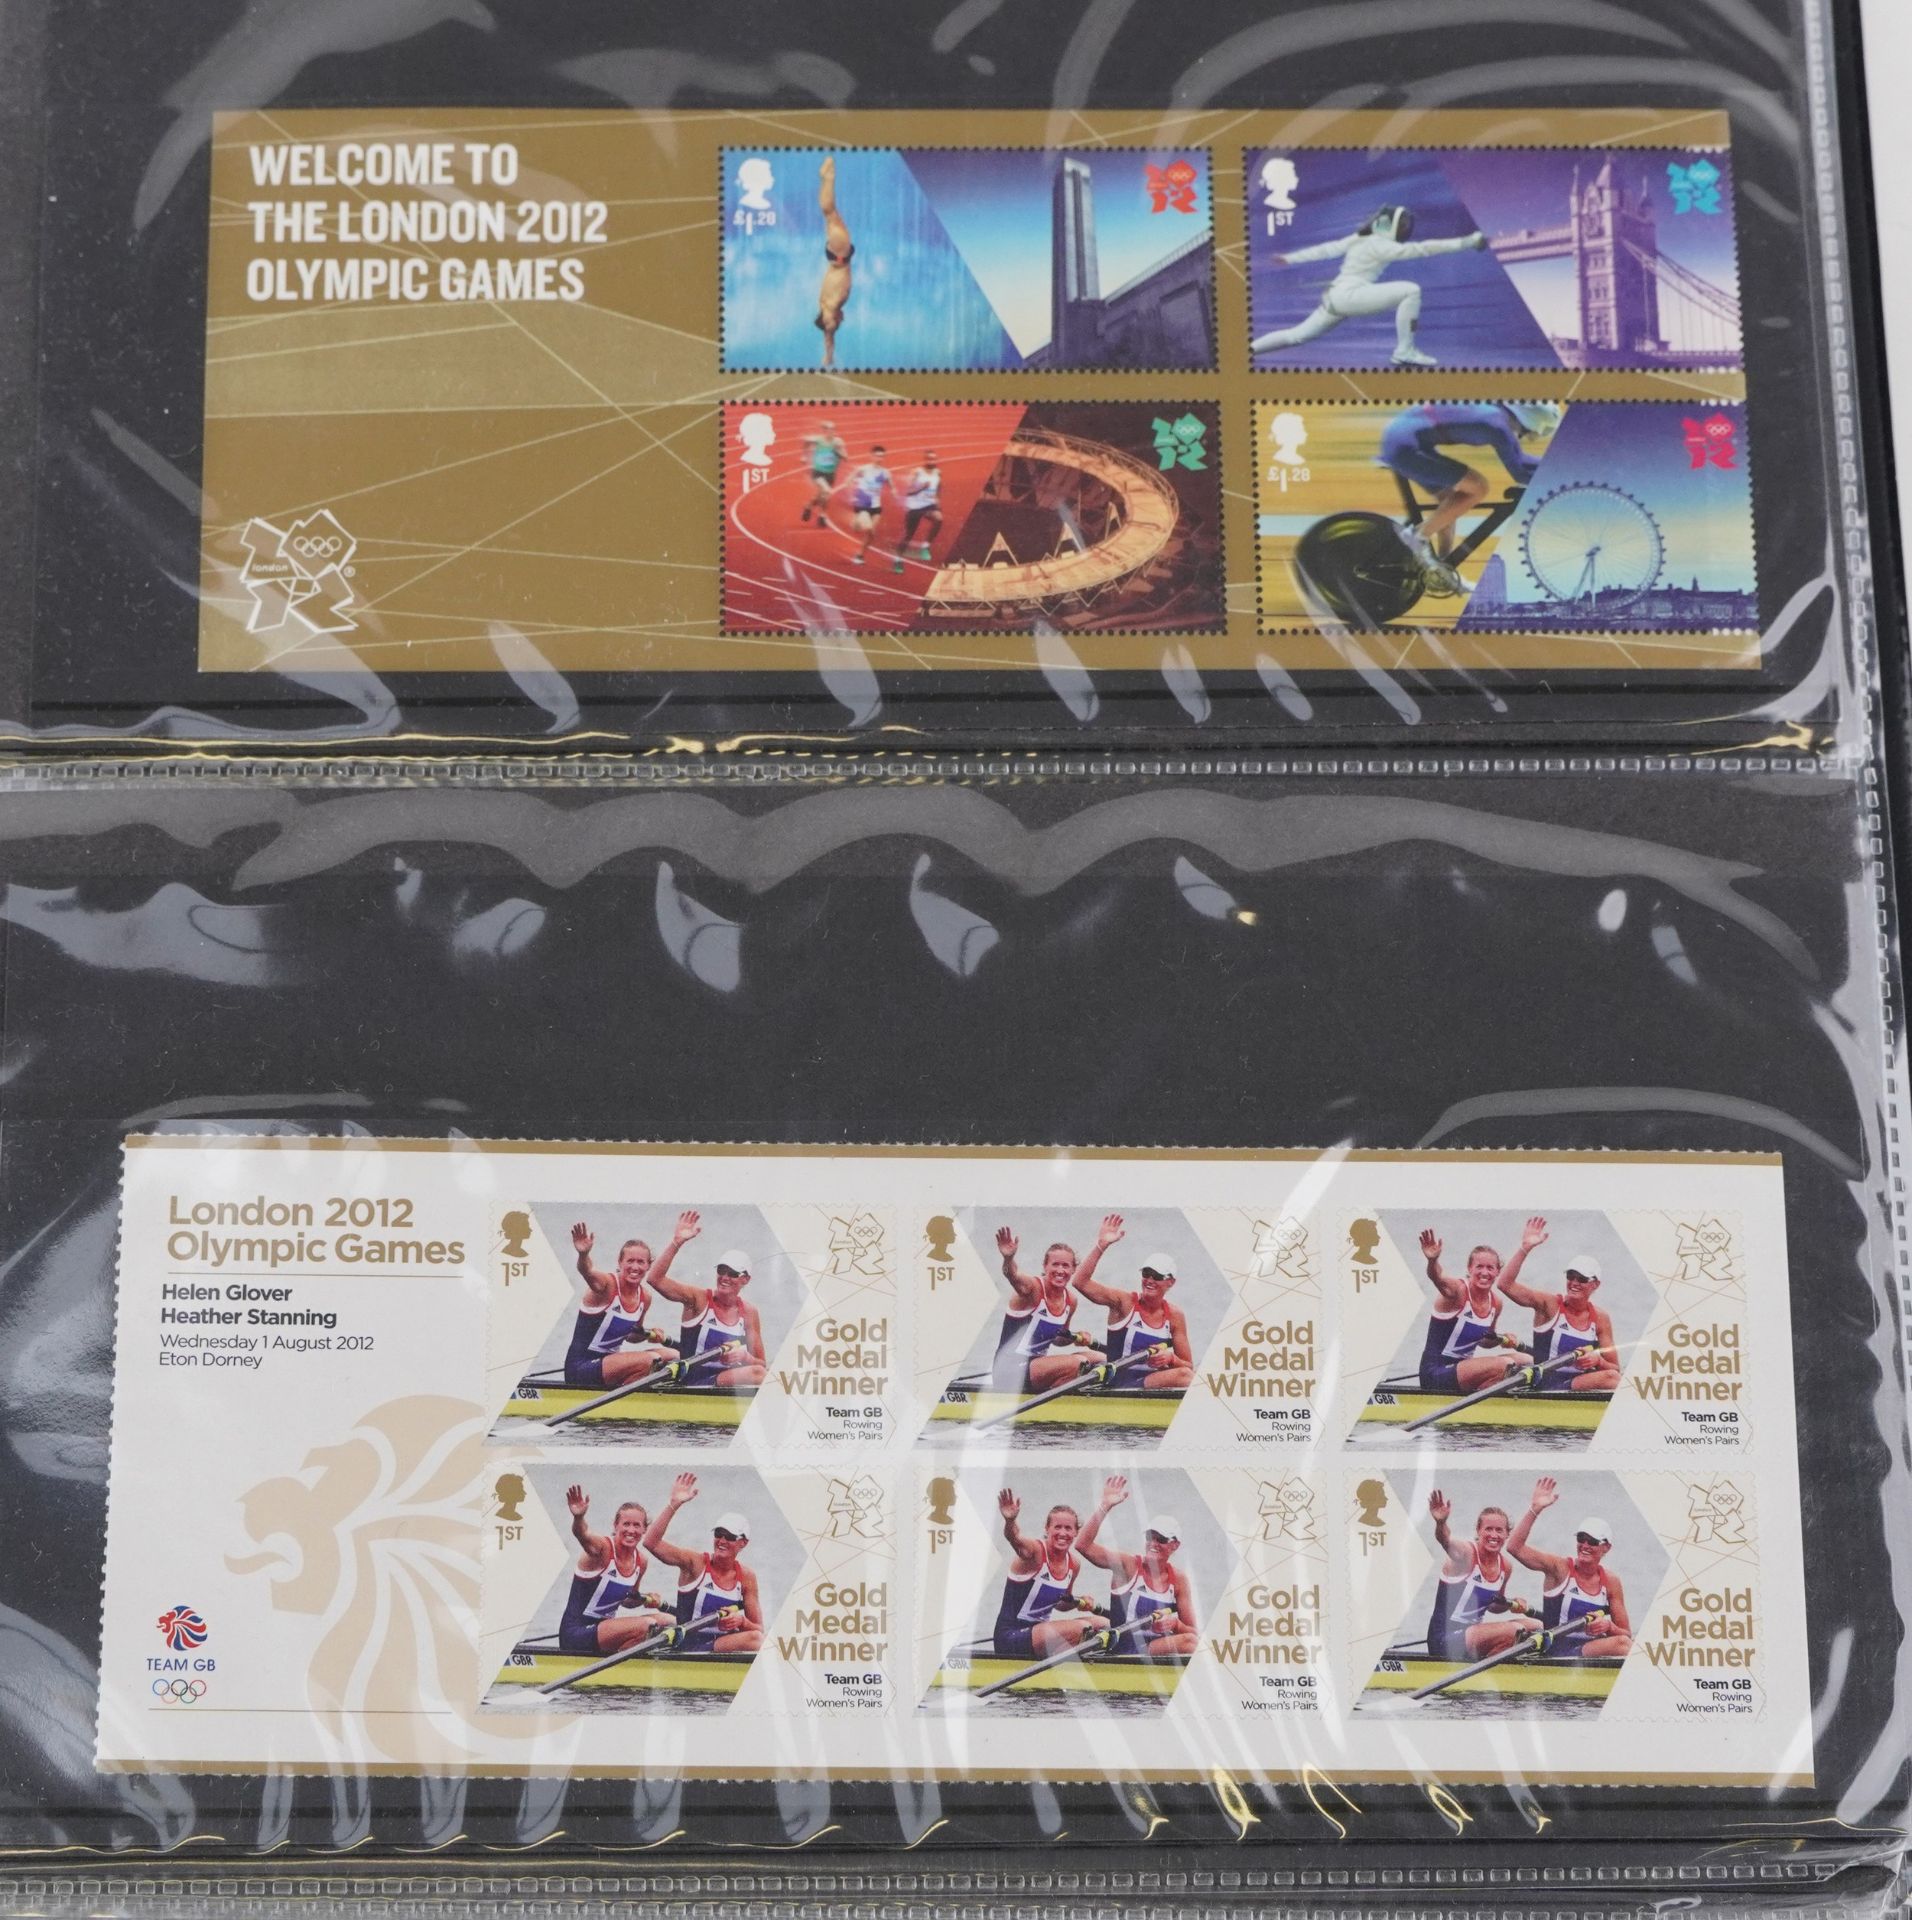 Collection of London 2012 Olympic Games mint unused stamps arranged in an album